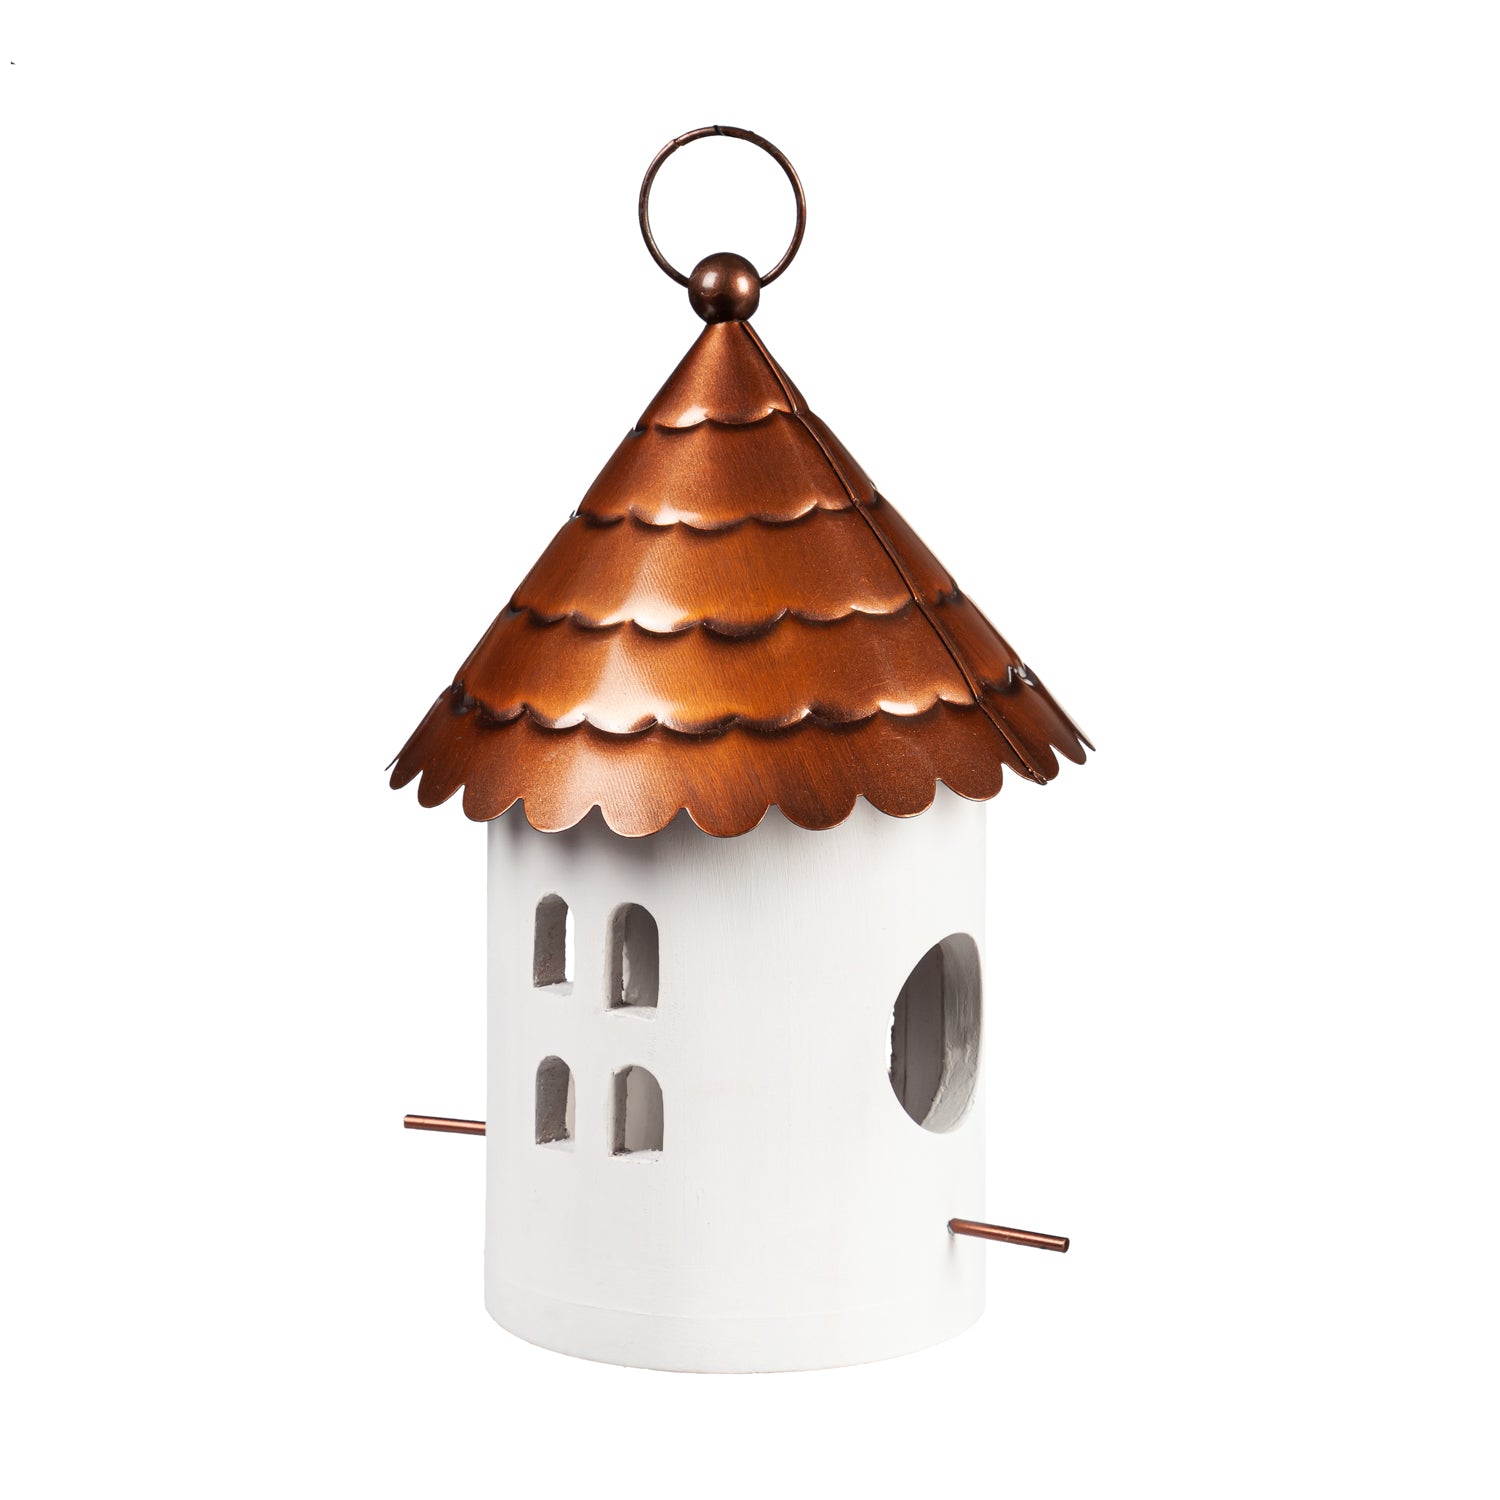 Plow & Hearth Wooden/Iron Hanging Birdhouse with Round Top